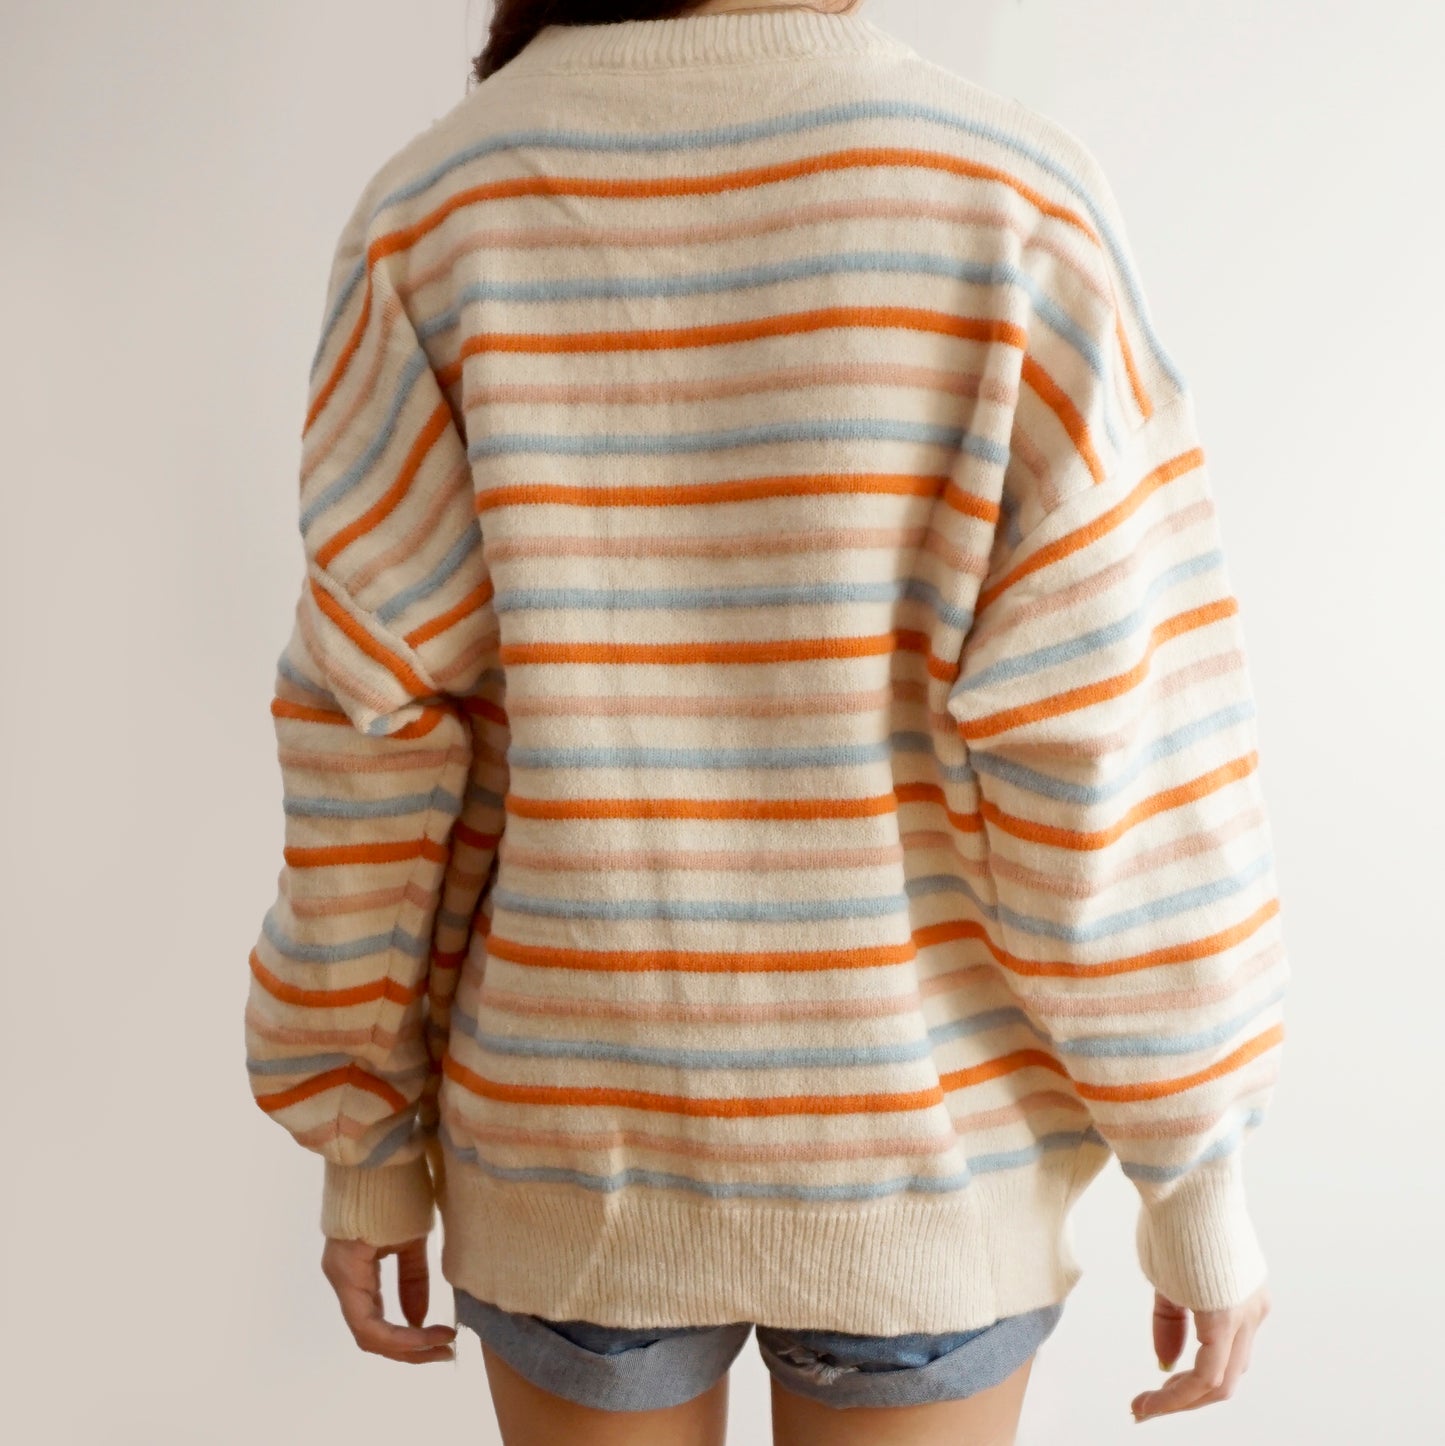 Candy Stripe Sweater (3 Colors)